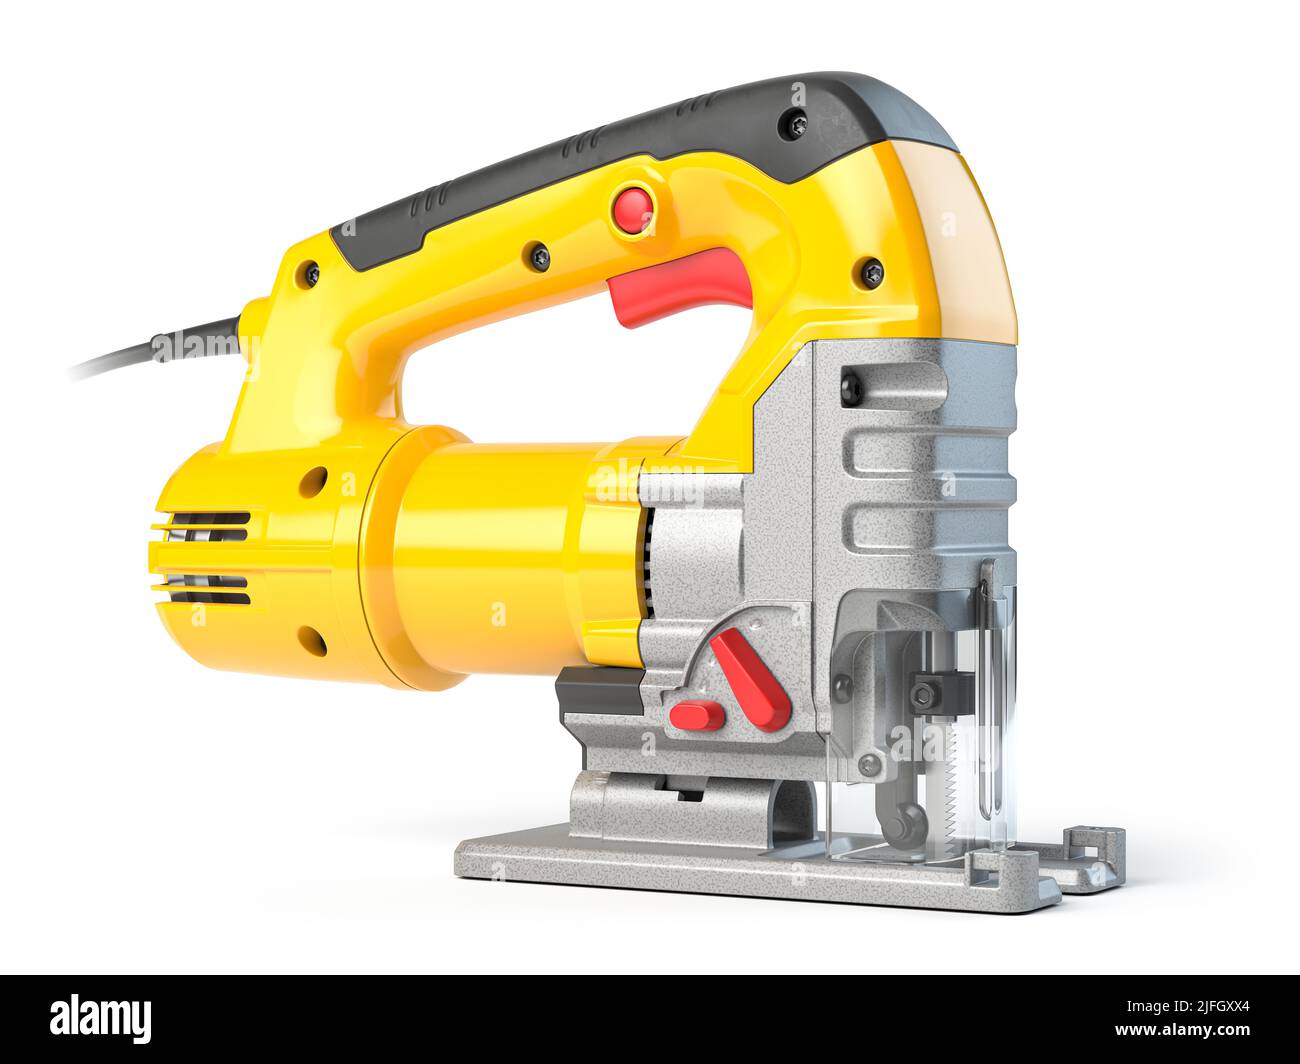 Yellow electric jigsaw on yellow background. Electric tool for carpenter. 3d illustration Stock Photo